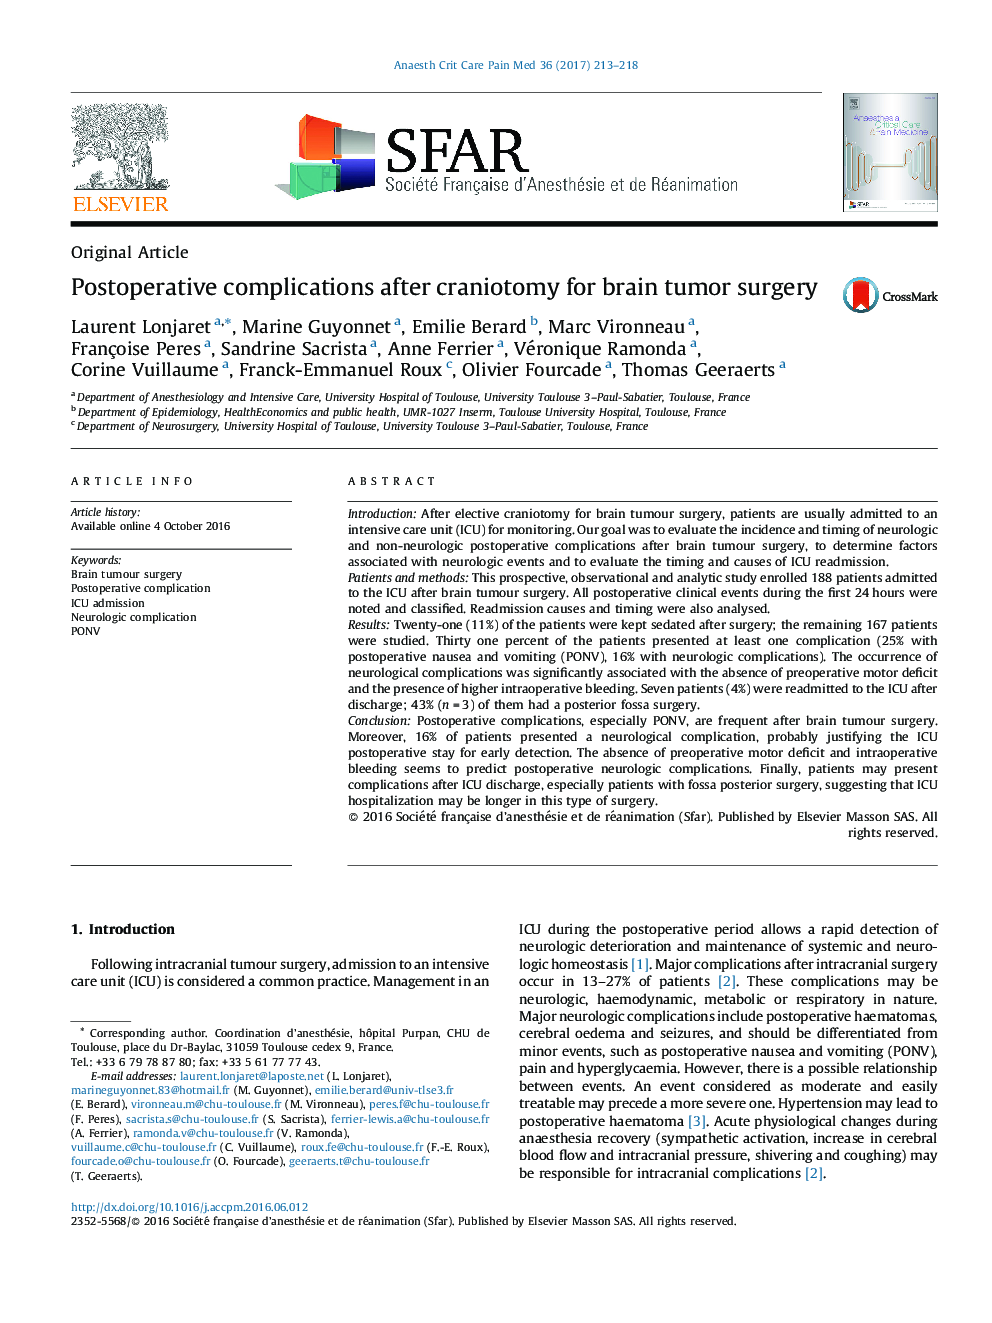 Postoperative complications after craniotomy for brain tumor surgery